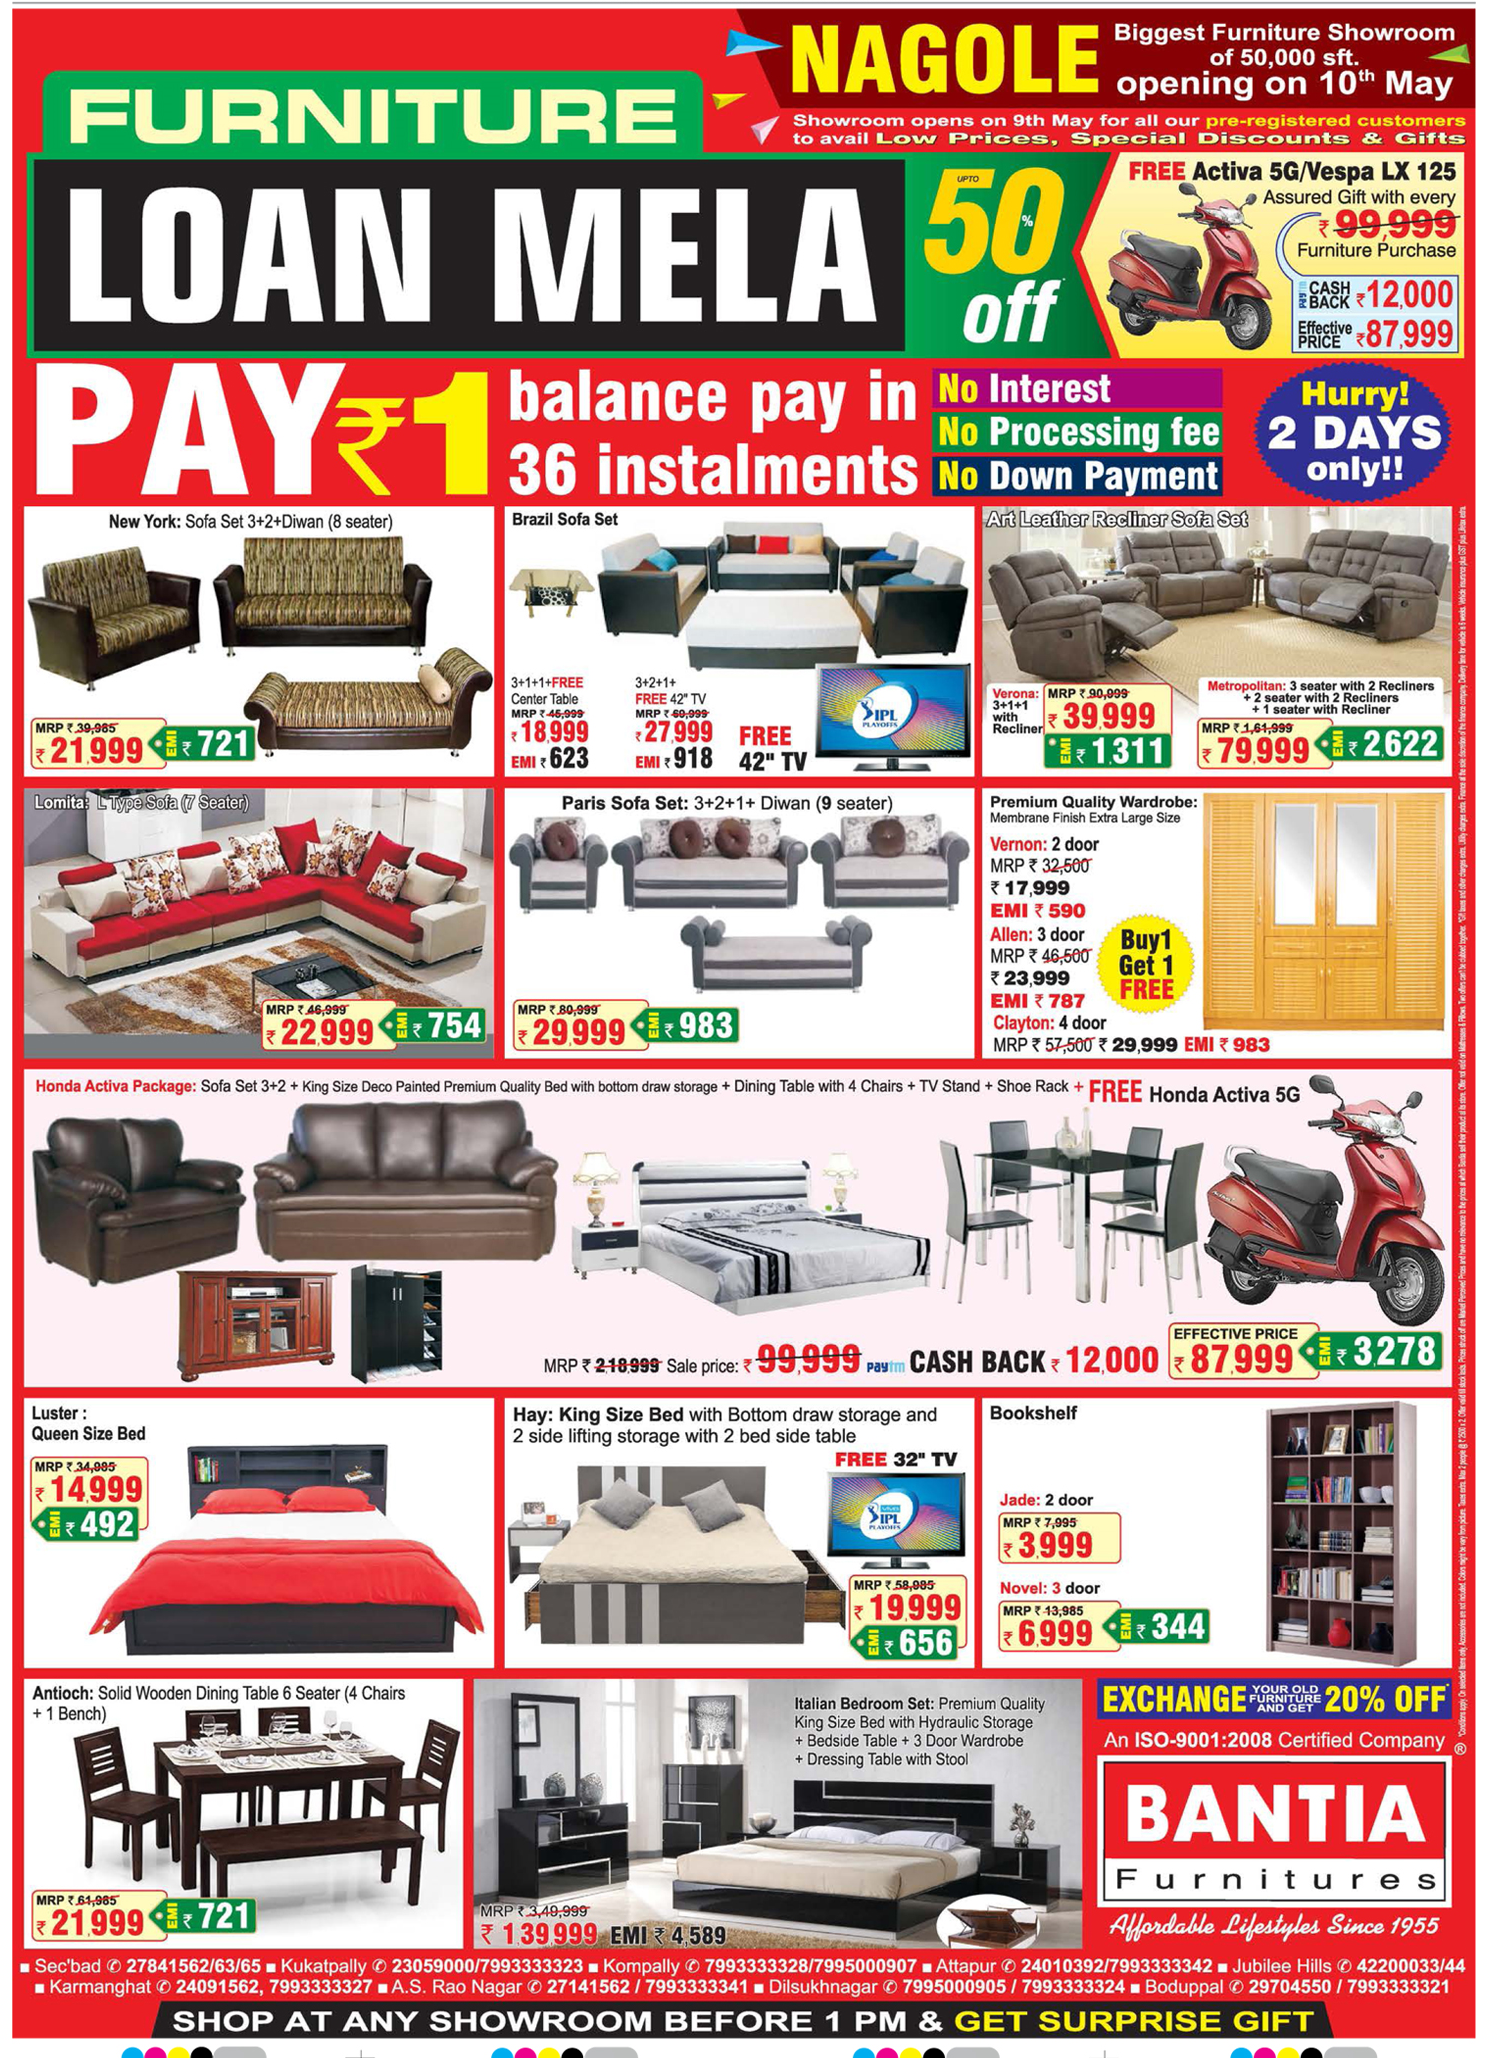 bantia-furniture-loan-mela-pay-rs-1-balance-pay-in-36-installments-ad-deccan-chronicle-hyderabad-02-03-2019.png